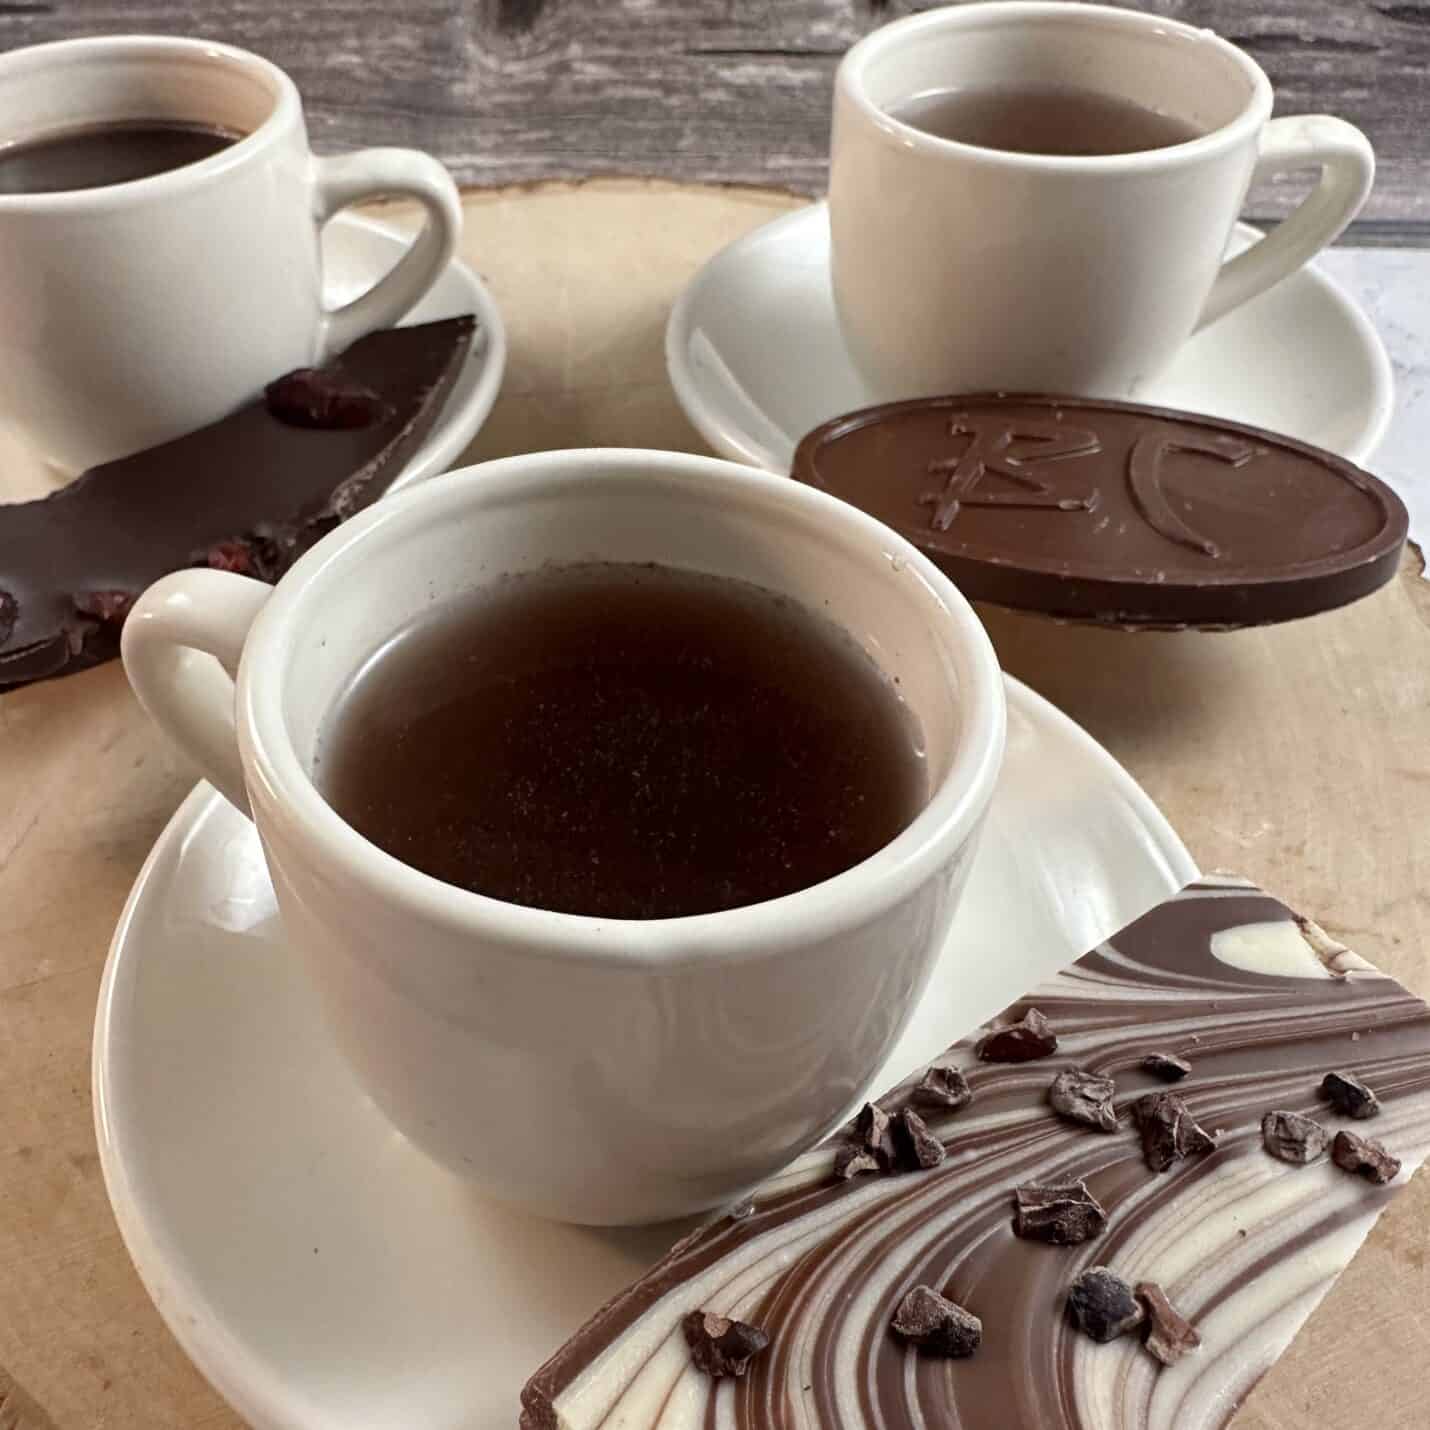 Three small cups of chocolate drinks with three pieces of chocolate